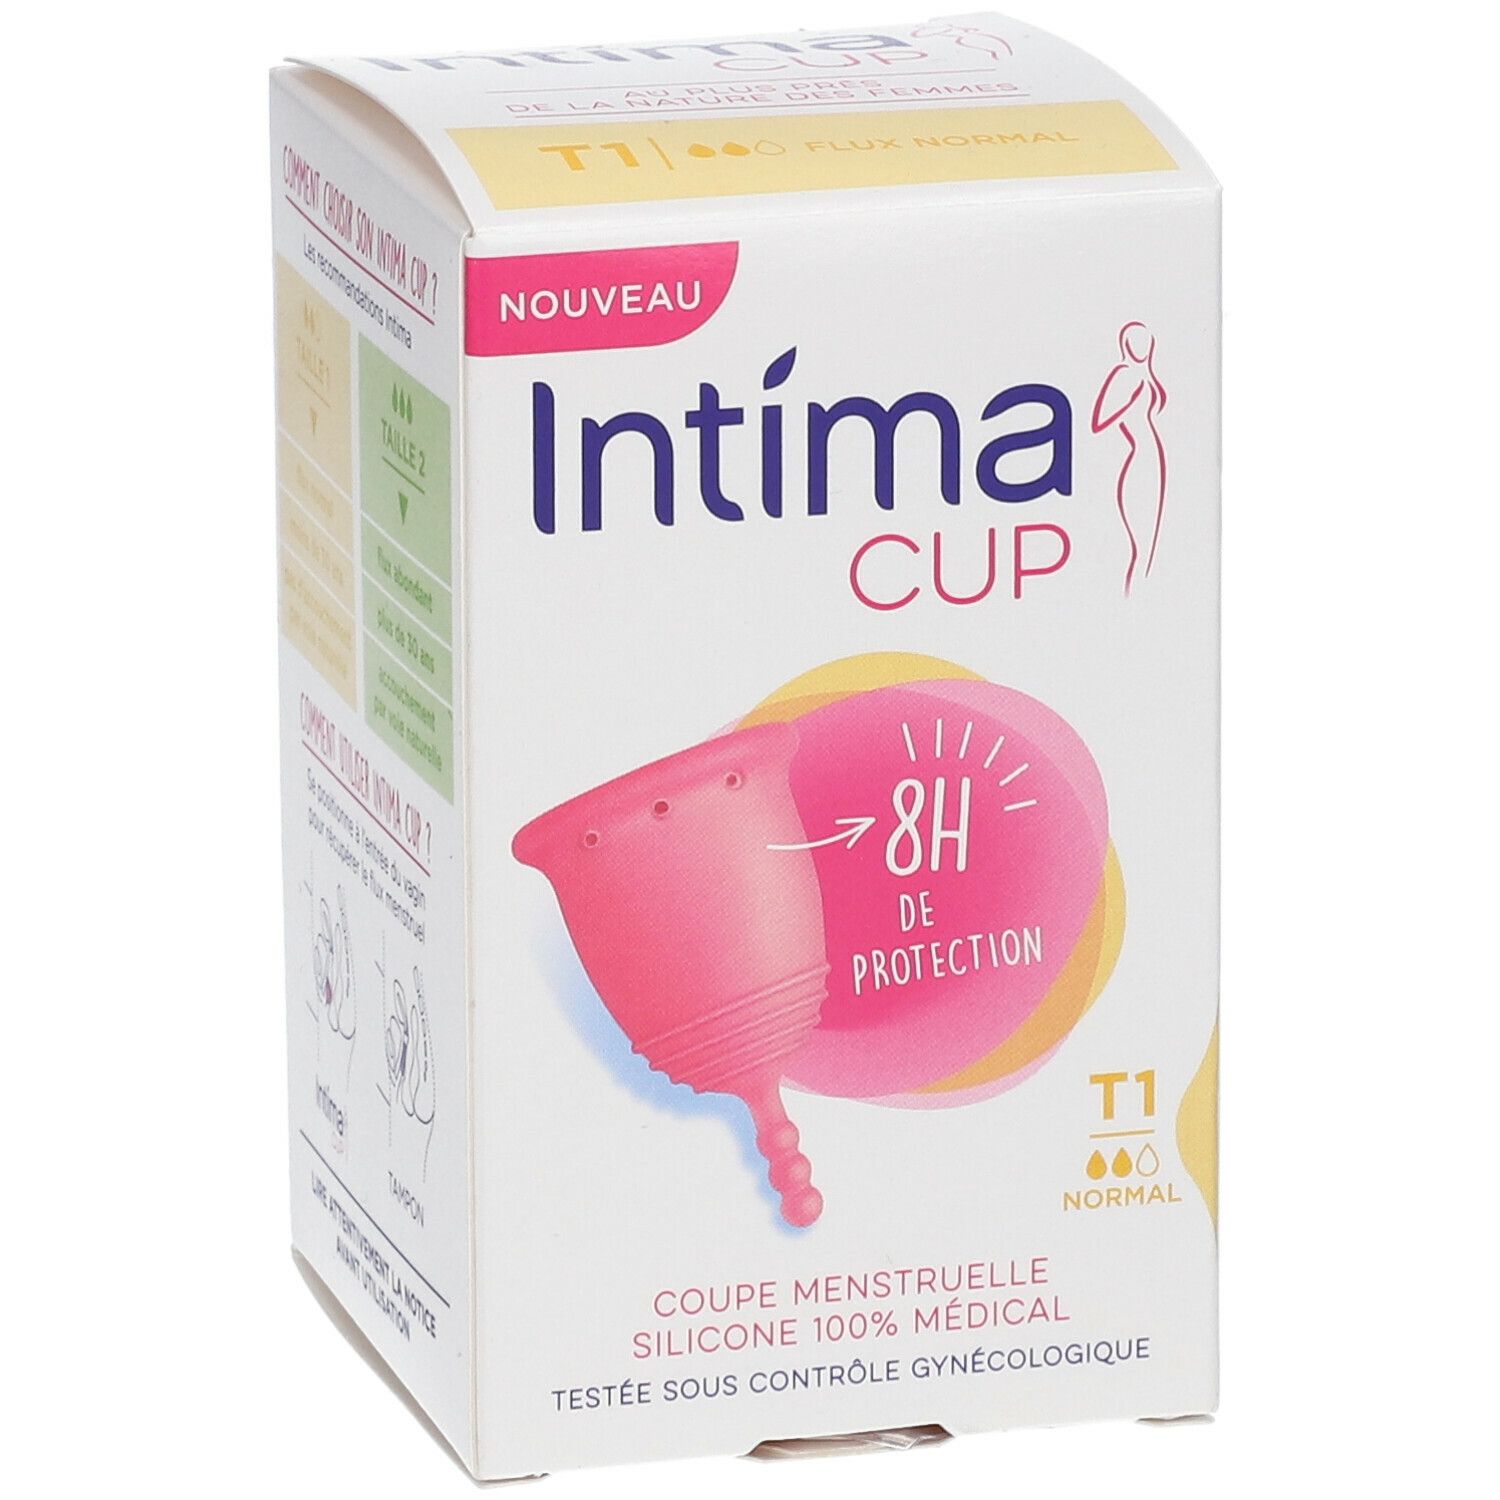 Intima CUP T1 Normal